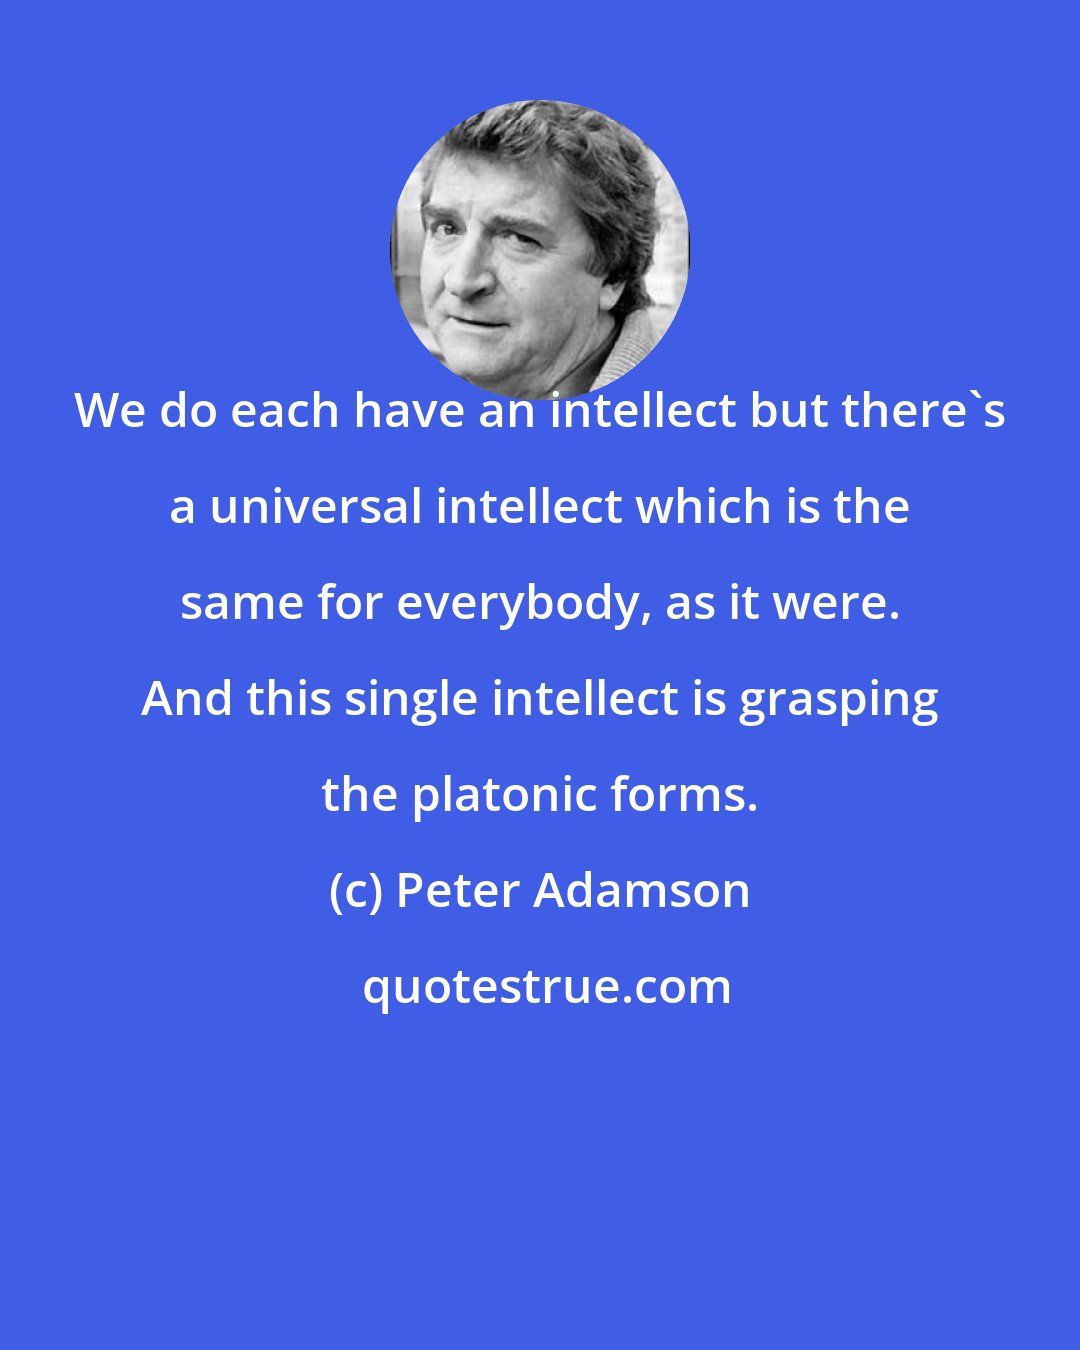 Peter Adamson: We do each have an intellect but there's a universal intellect which is the same for everybody, as it were. And this single intellect is grasping the platonic forms.